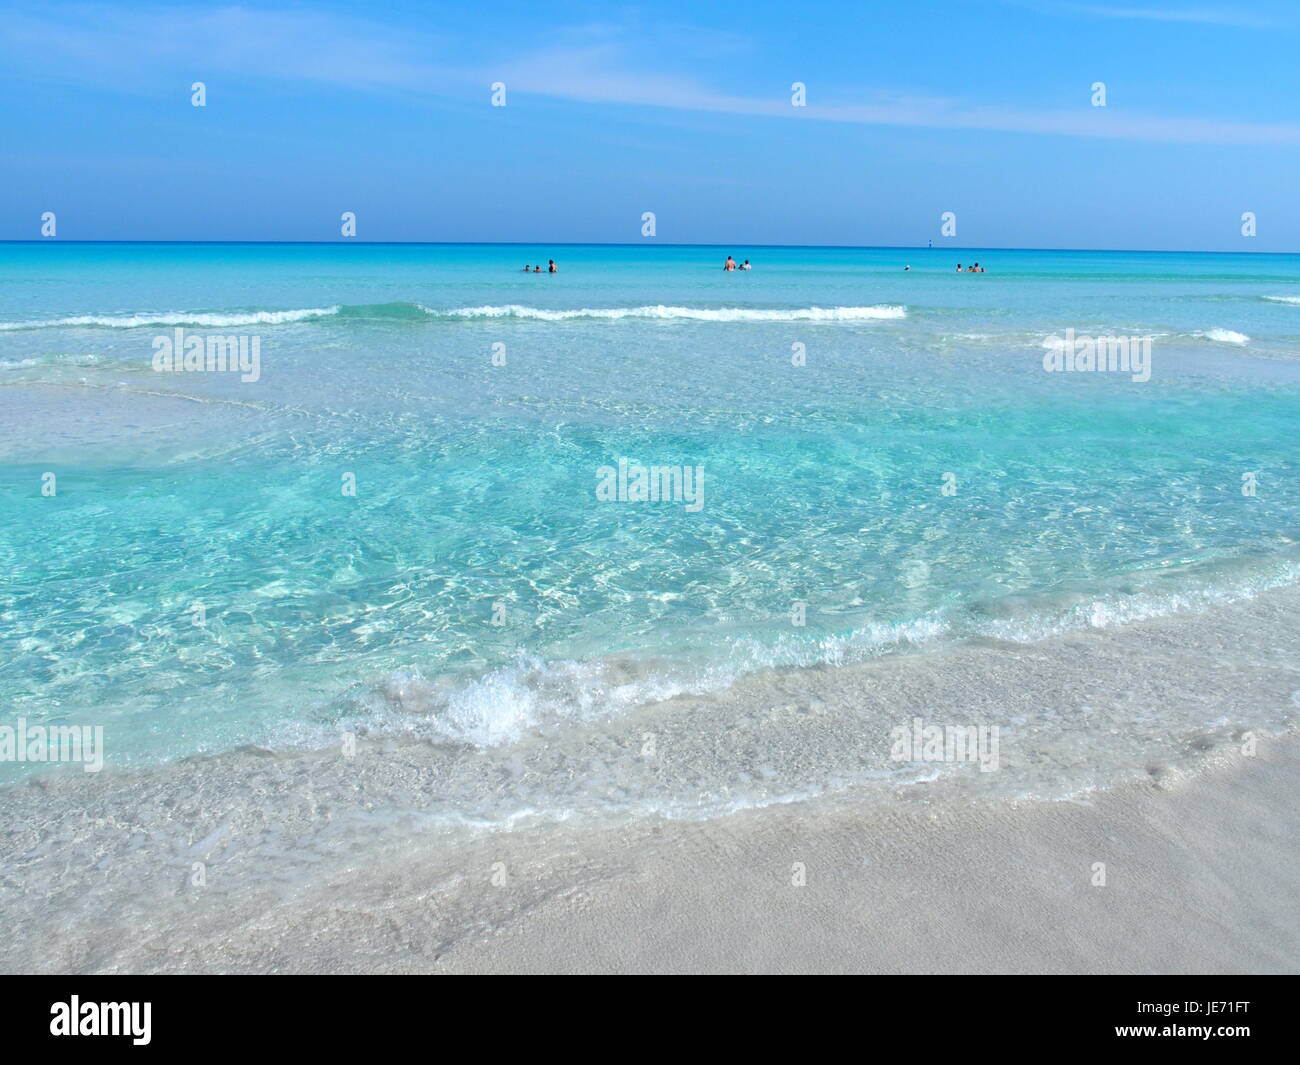 Sandy beach at Caribbean Sea in VARADERO city in CUBA with clear water on seaside landscape and exotic palms and trees, clear blue sky in 2017. Stock Photo